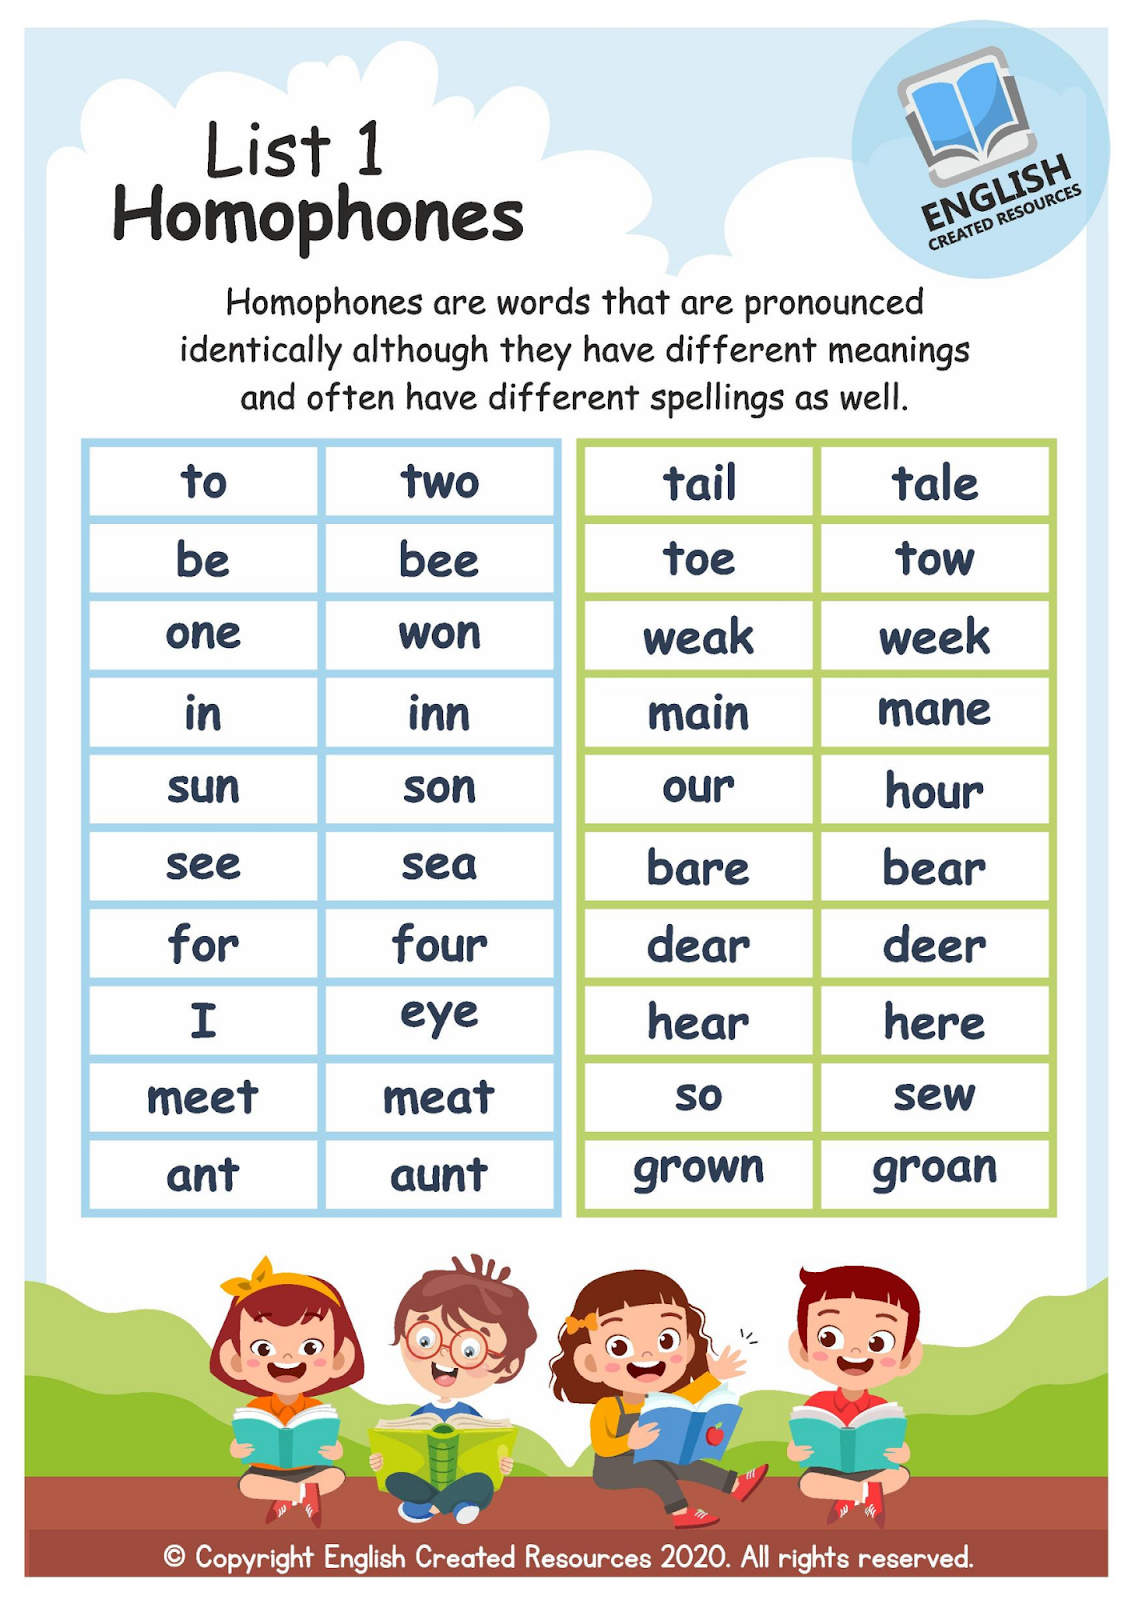 homophones-worksheets-english-created-resources